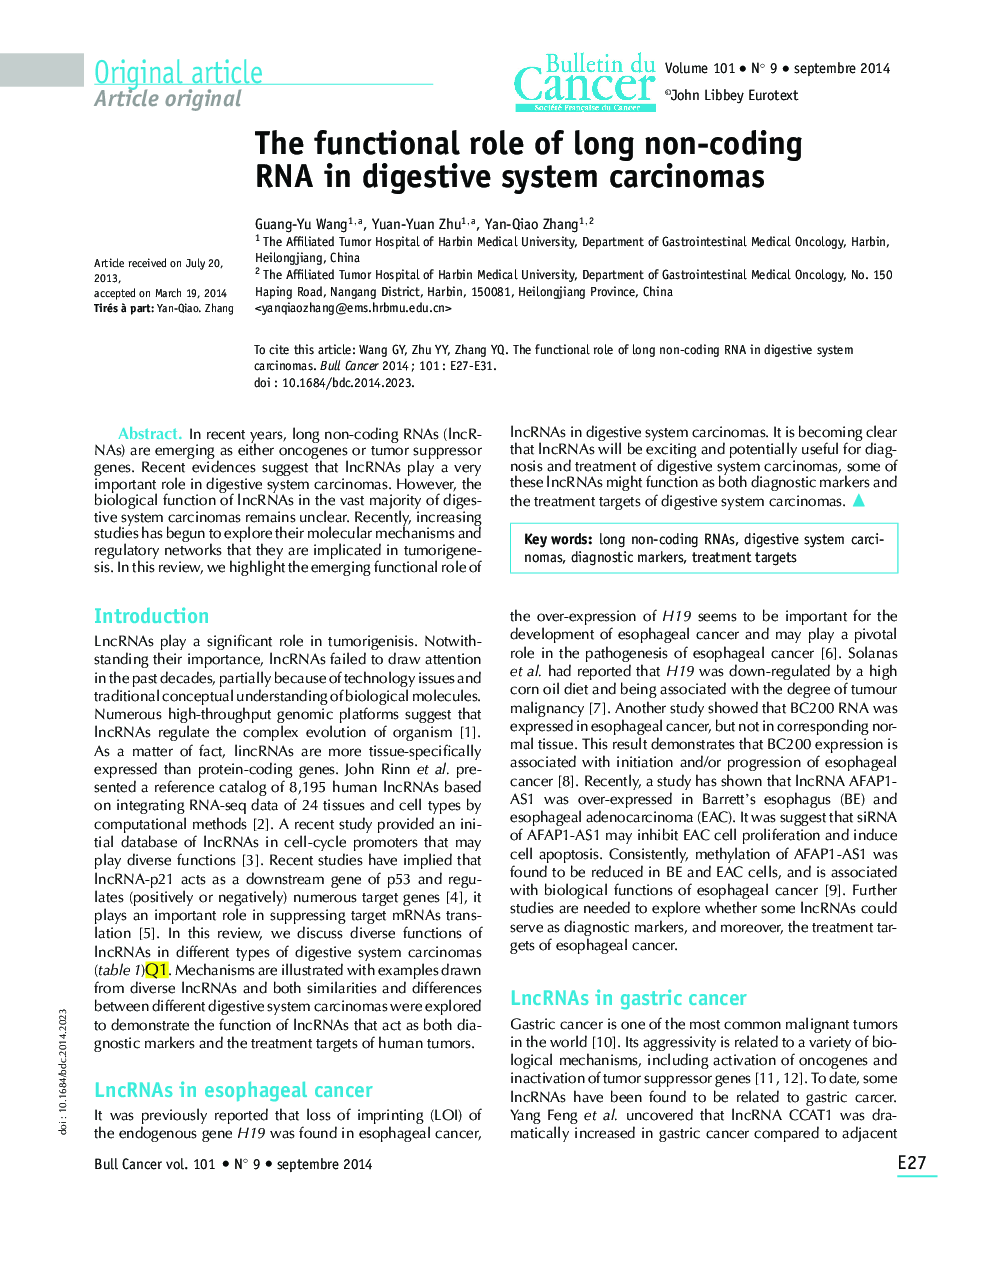 The functional role of long non-coding RNA in digestive system carcinomas